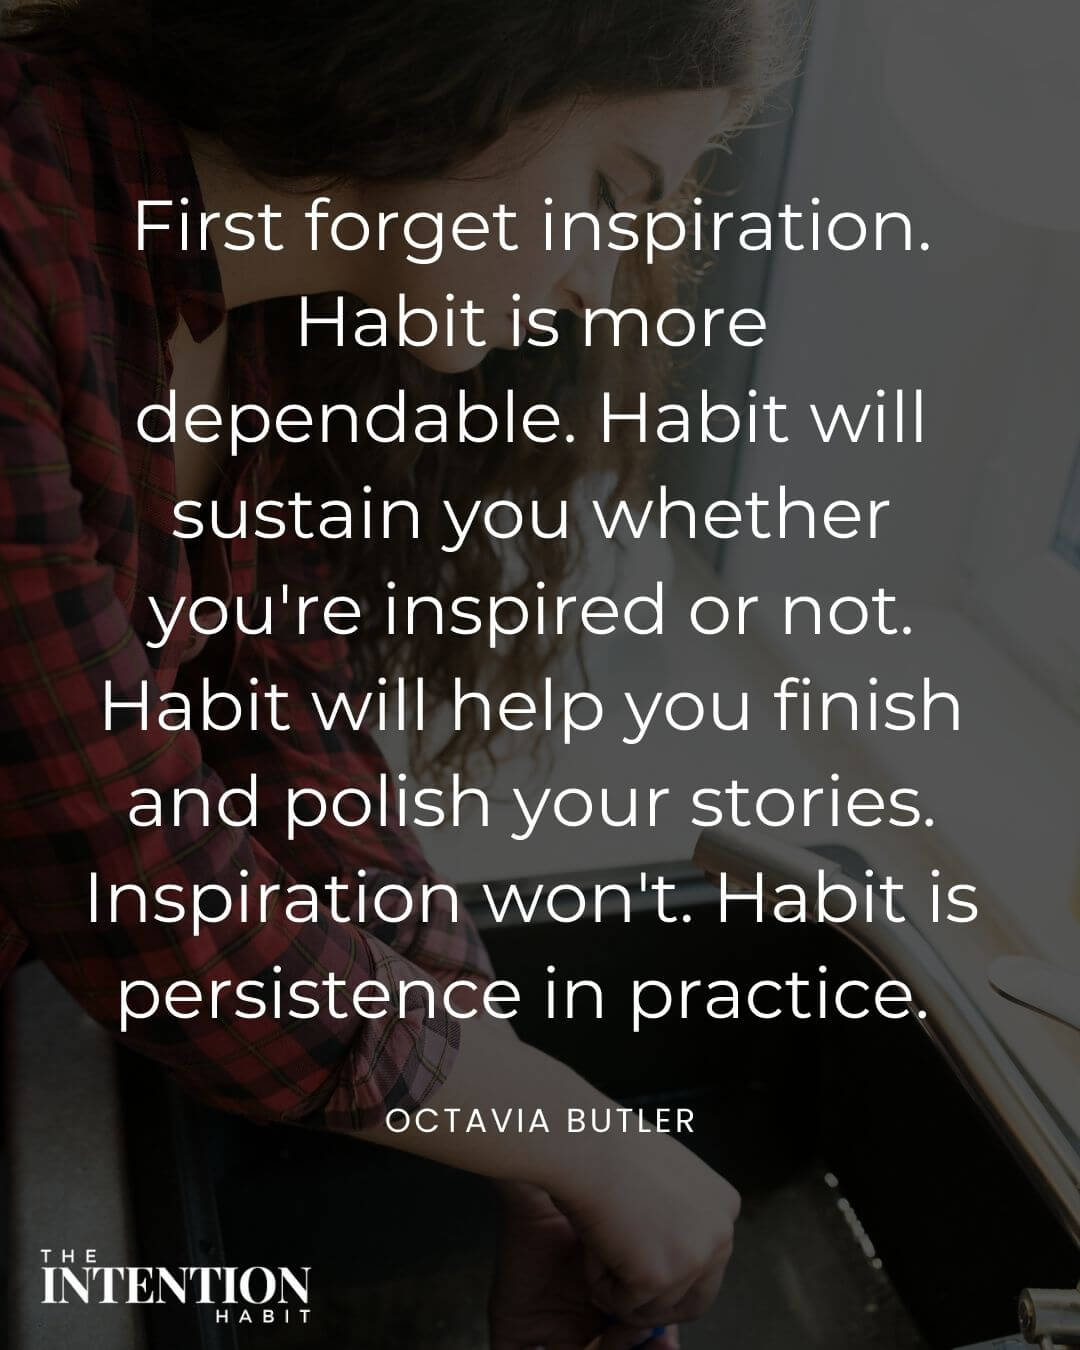 Intentional living quote - first forget inspiration, habit is more dependable. Habit will sustain you whether you're inspired or not. Habit will help you finish and polish your stories. Inspiration won't habit is persistence in practice